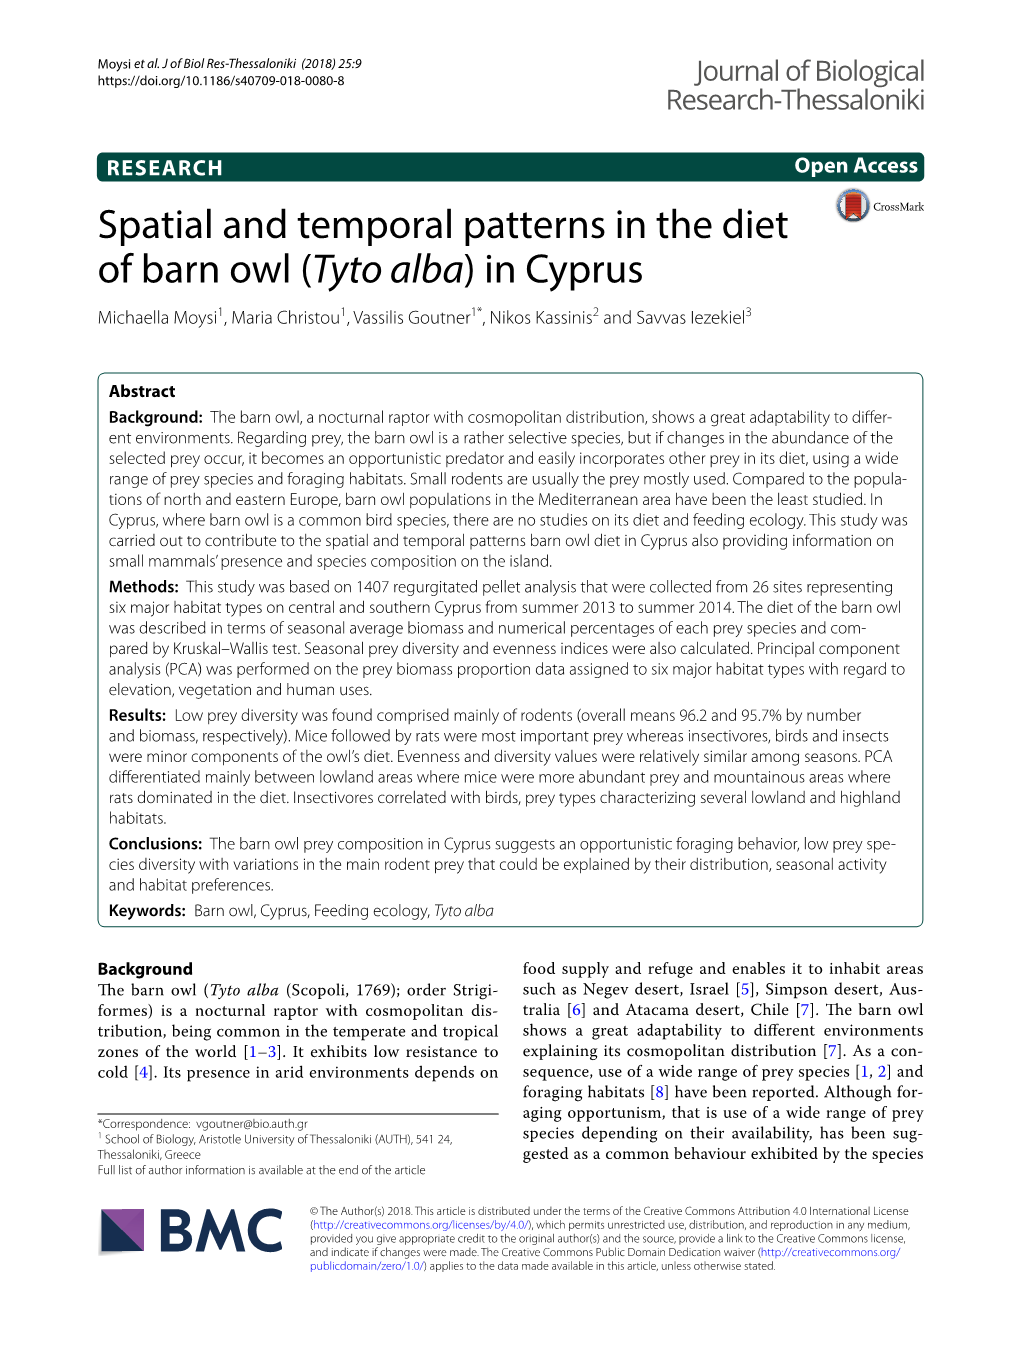 Spatial and Temporal Patterns in the Diet of Barn Owl (Tyto Alba) in Cyprus